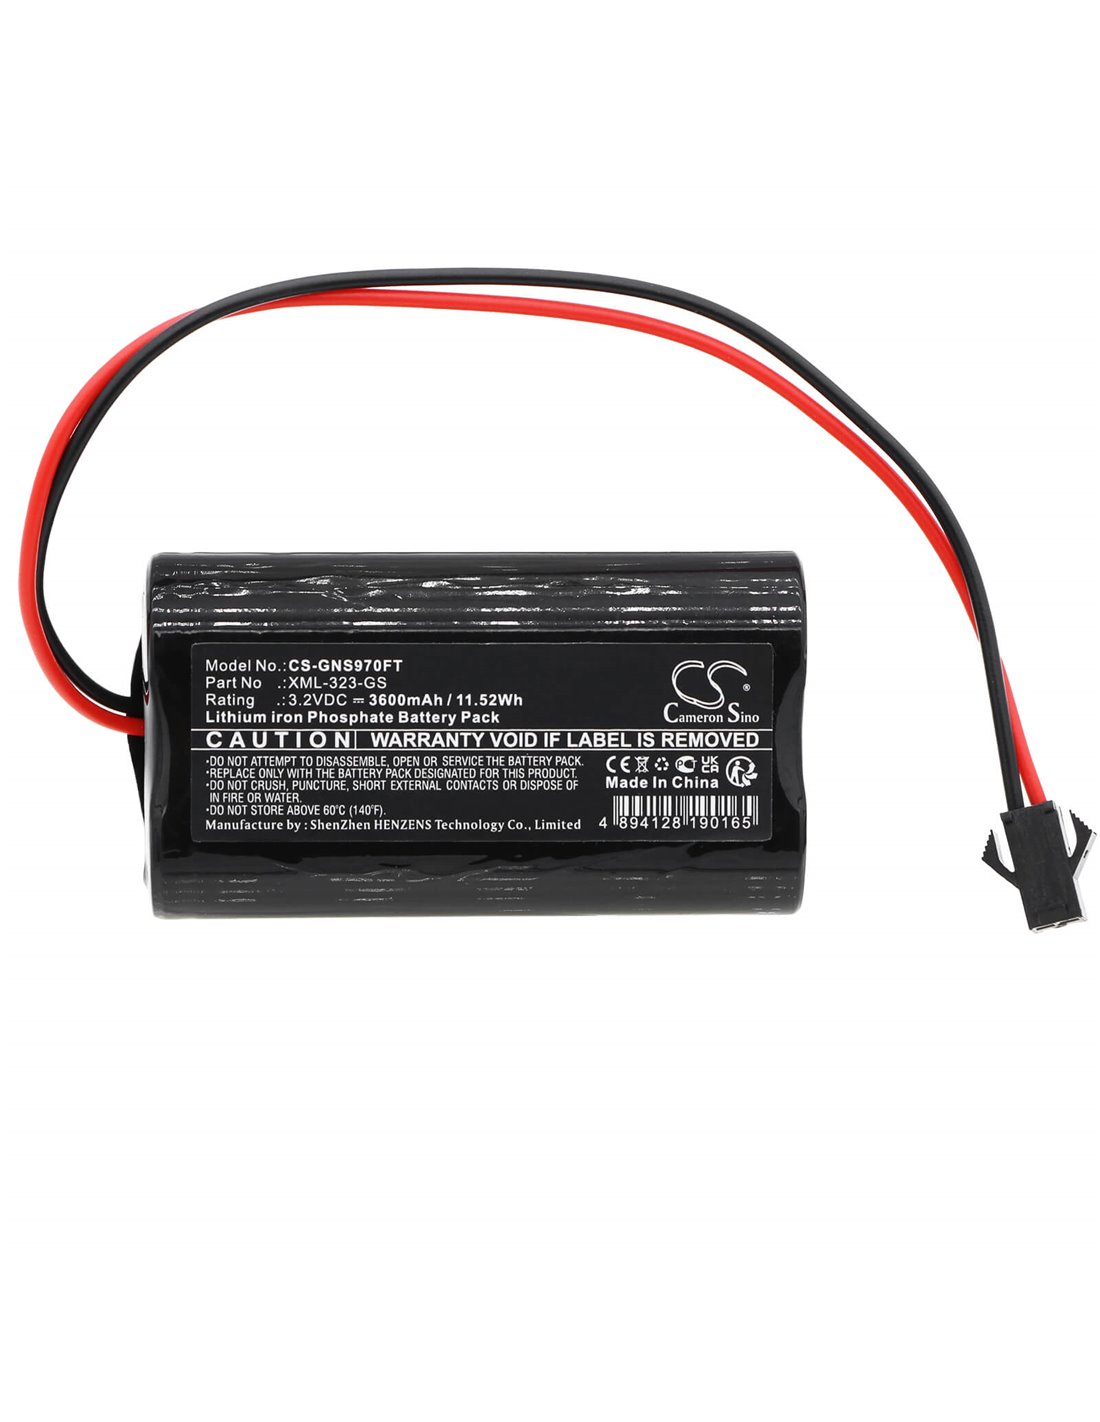 3.2V, LiFePO4, 3600mAh , Battery fits Gama Sonic Gs-103, Gs-104, Gs-94, 11.52Wh